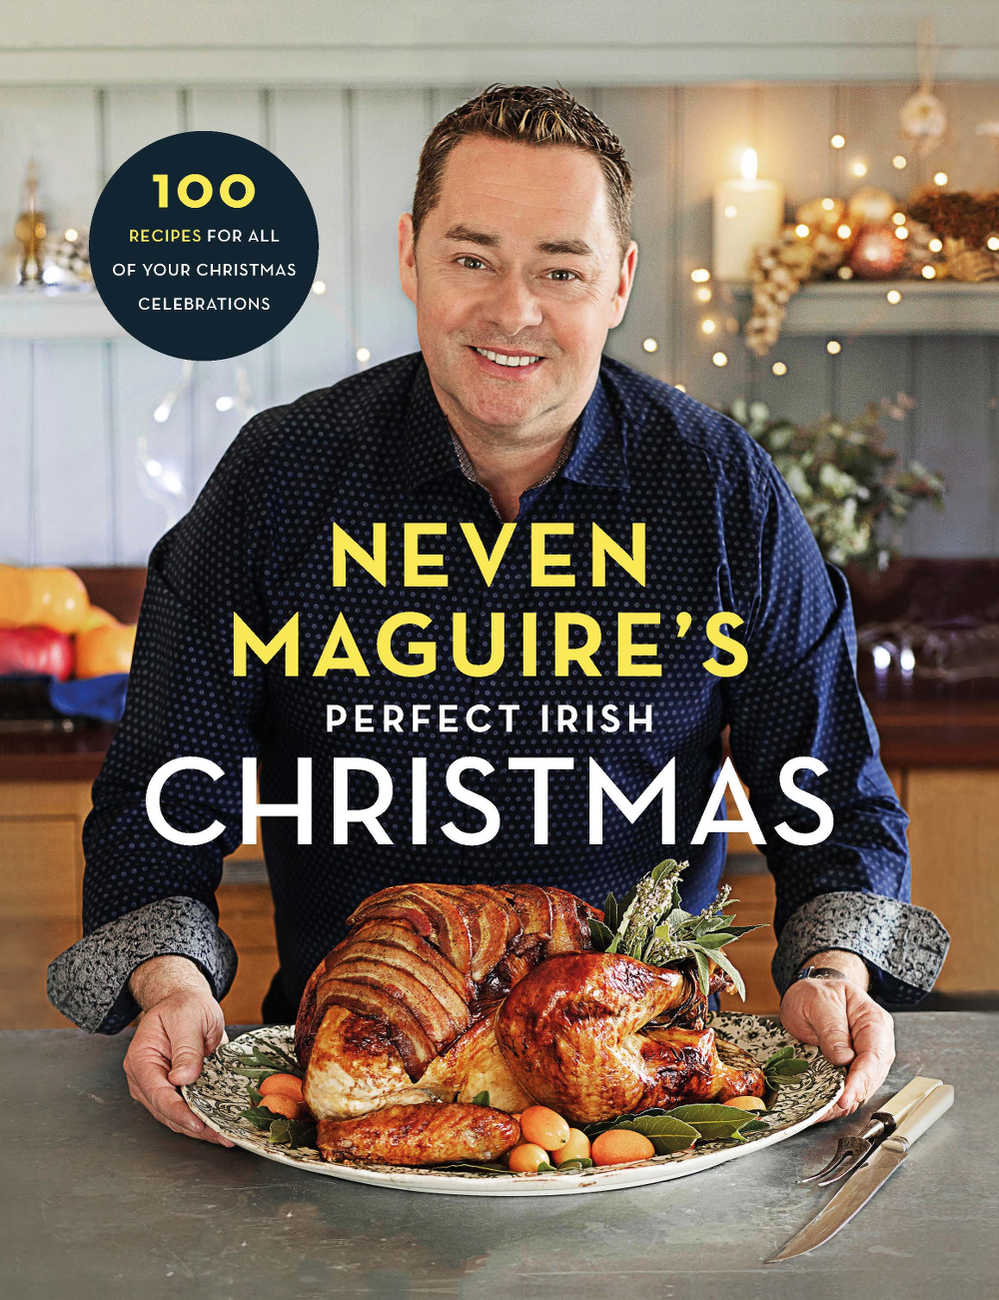 Neven Maguire’s Perfect Irish Christmas is published by Gill Books, price €22.99